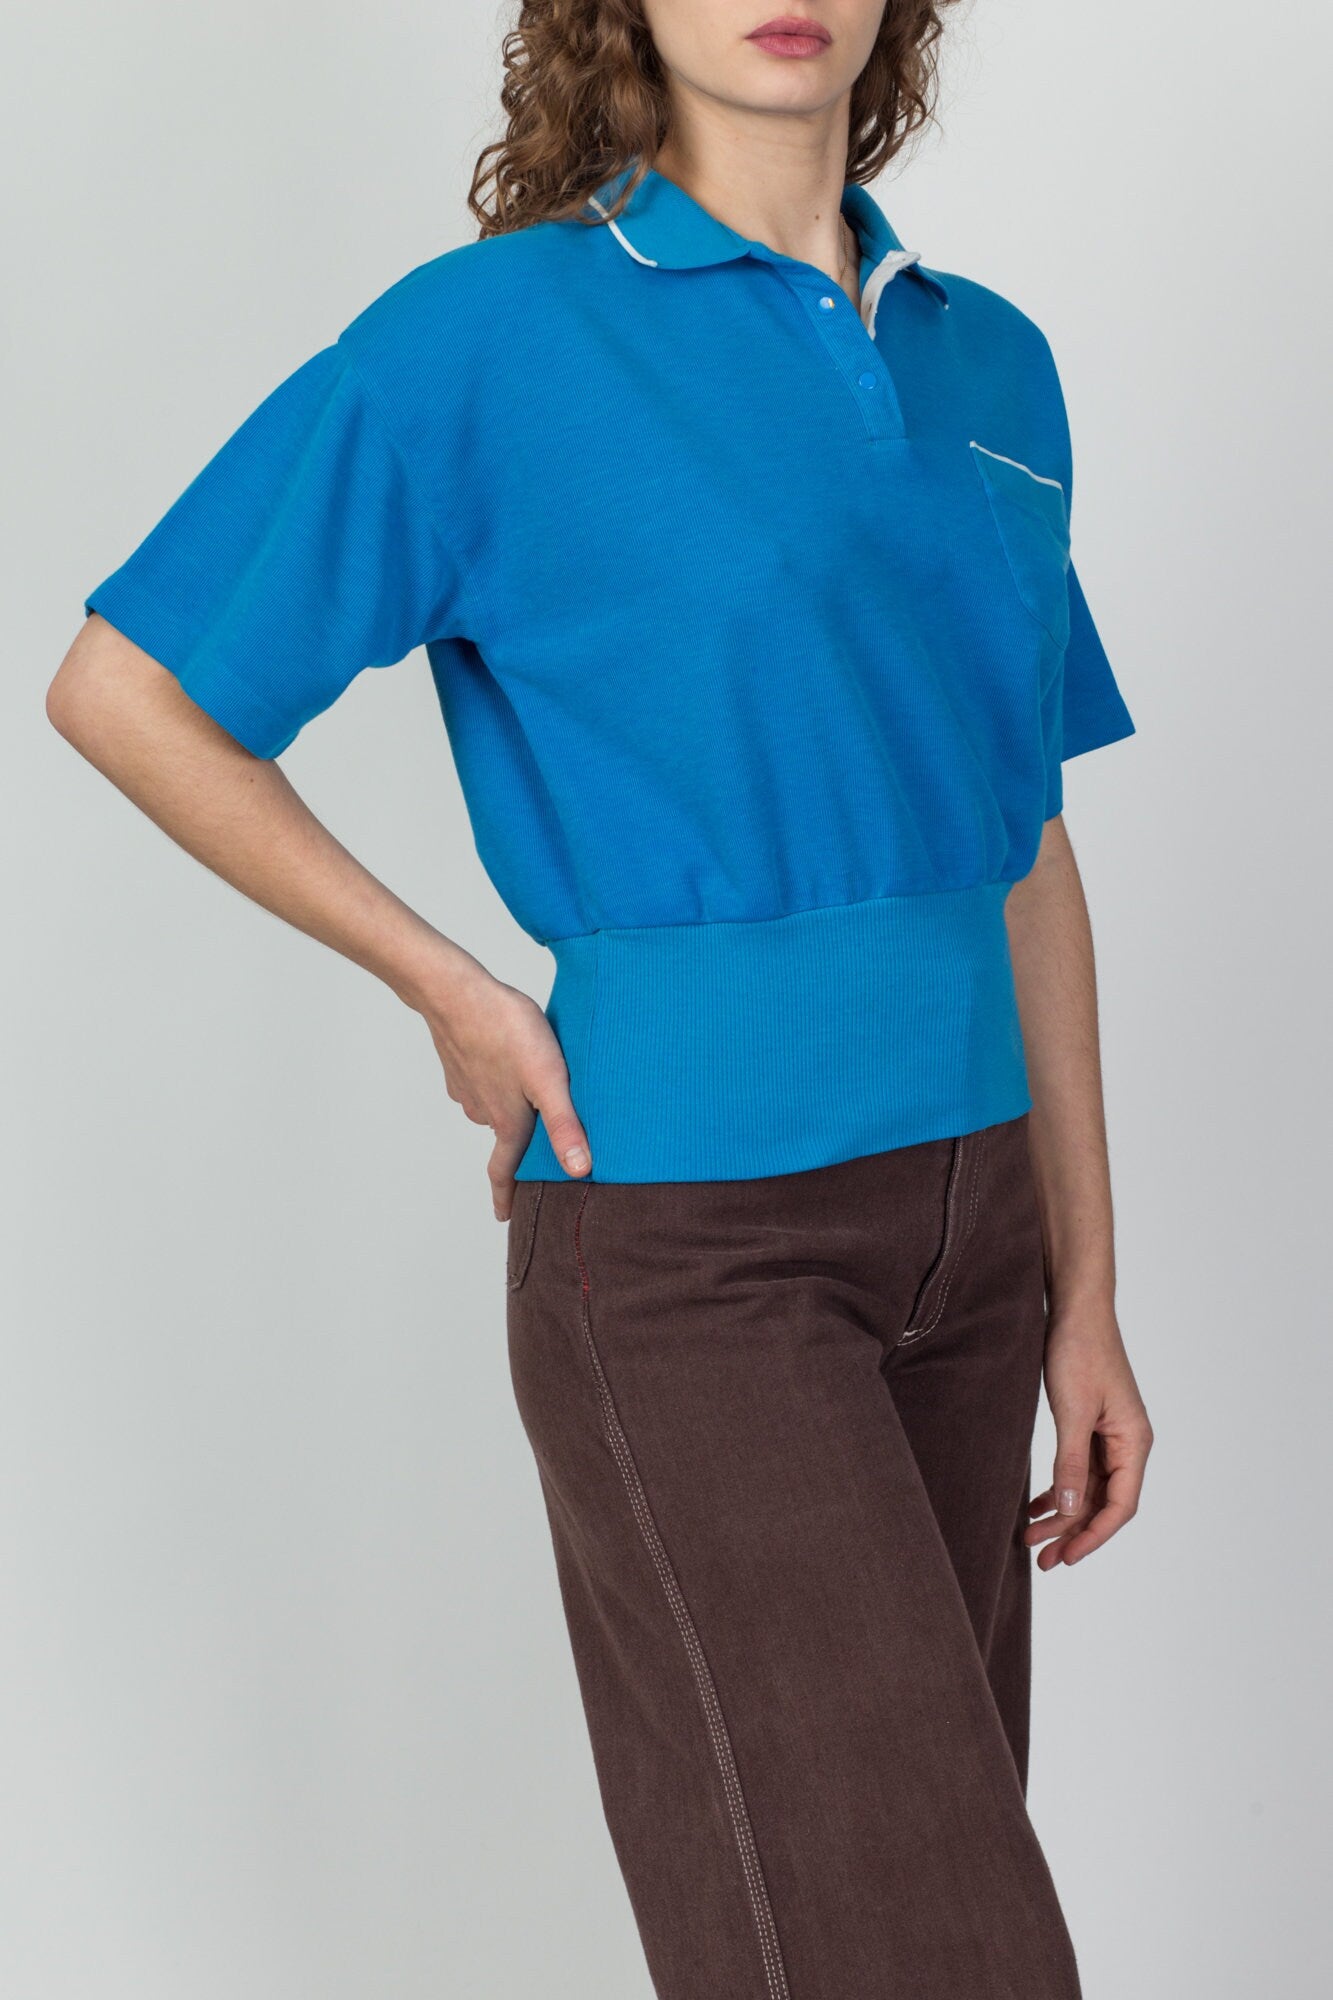 80s Cropped Blue Polo Shirt - Medium to Large 